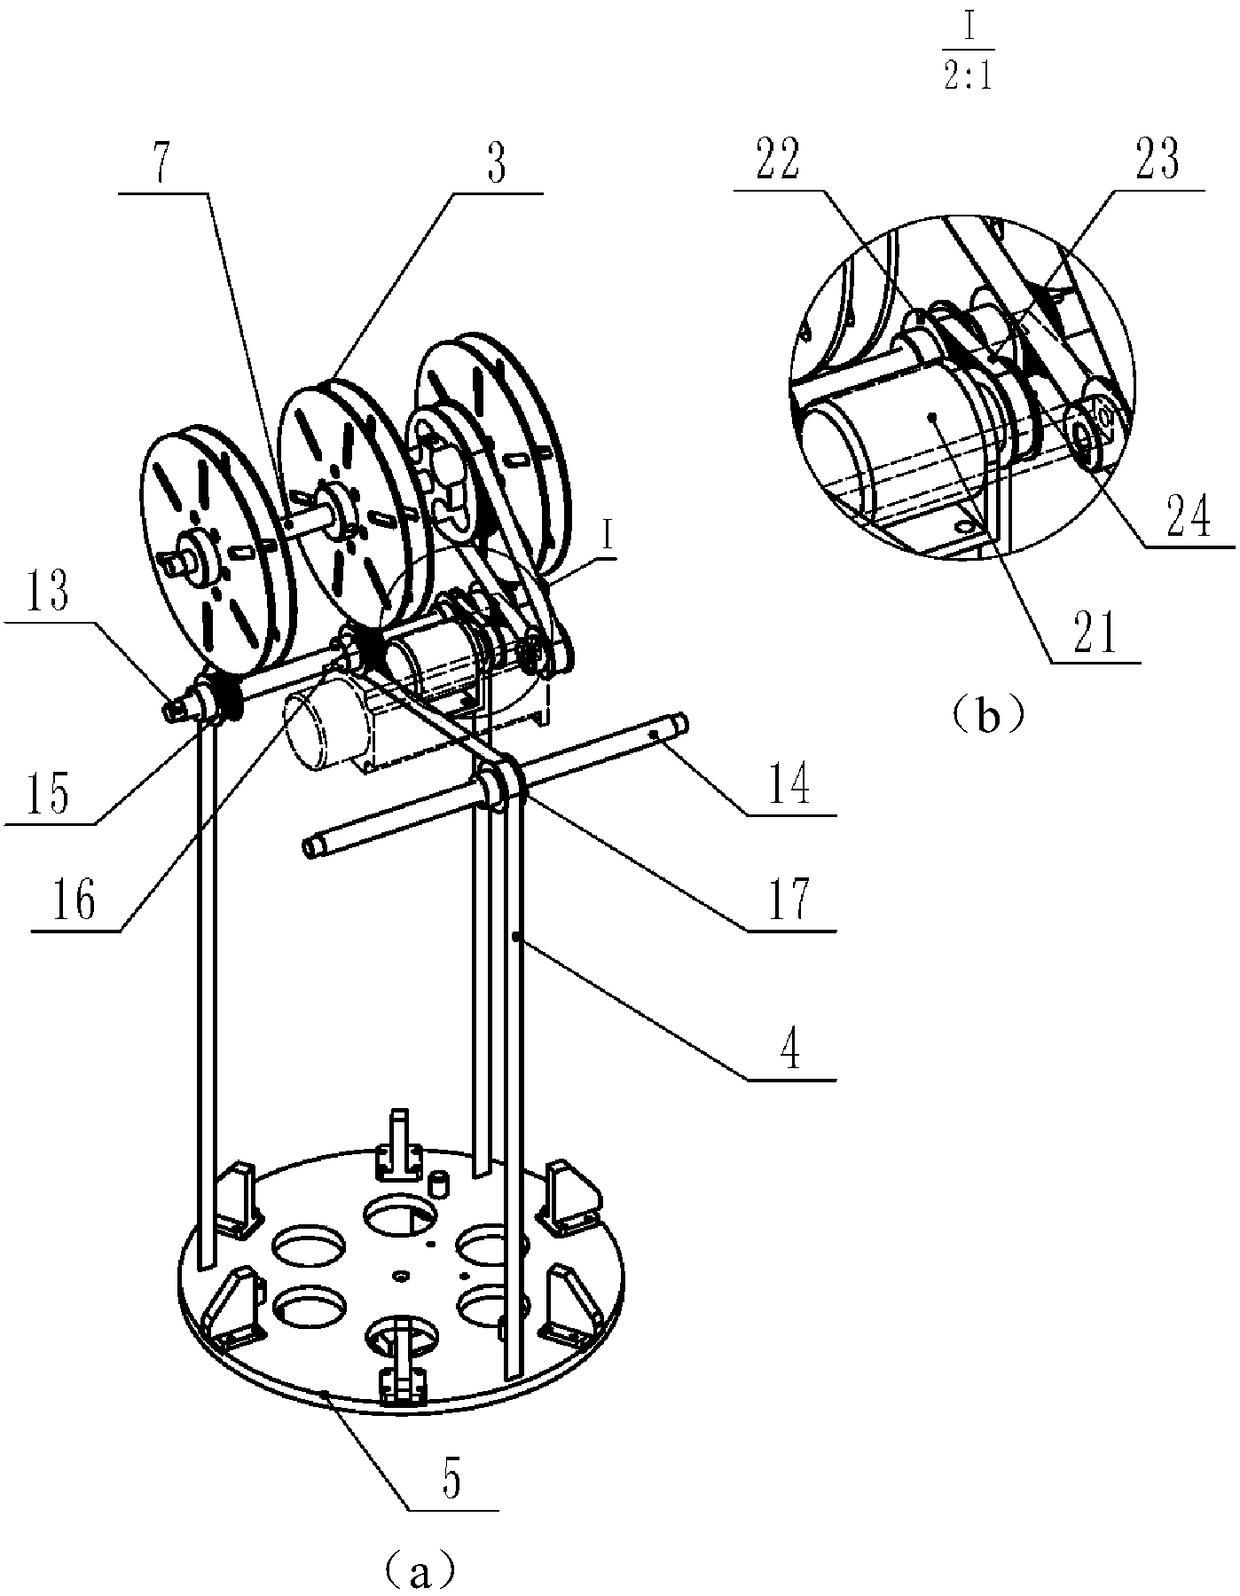 A three-point lifting device for underground detection